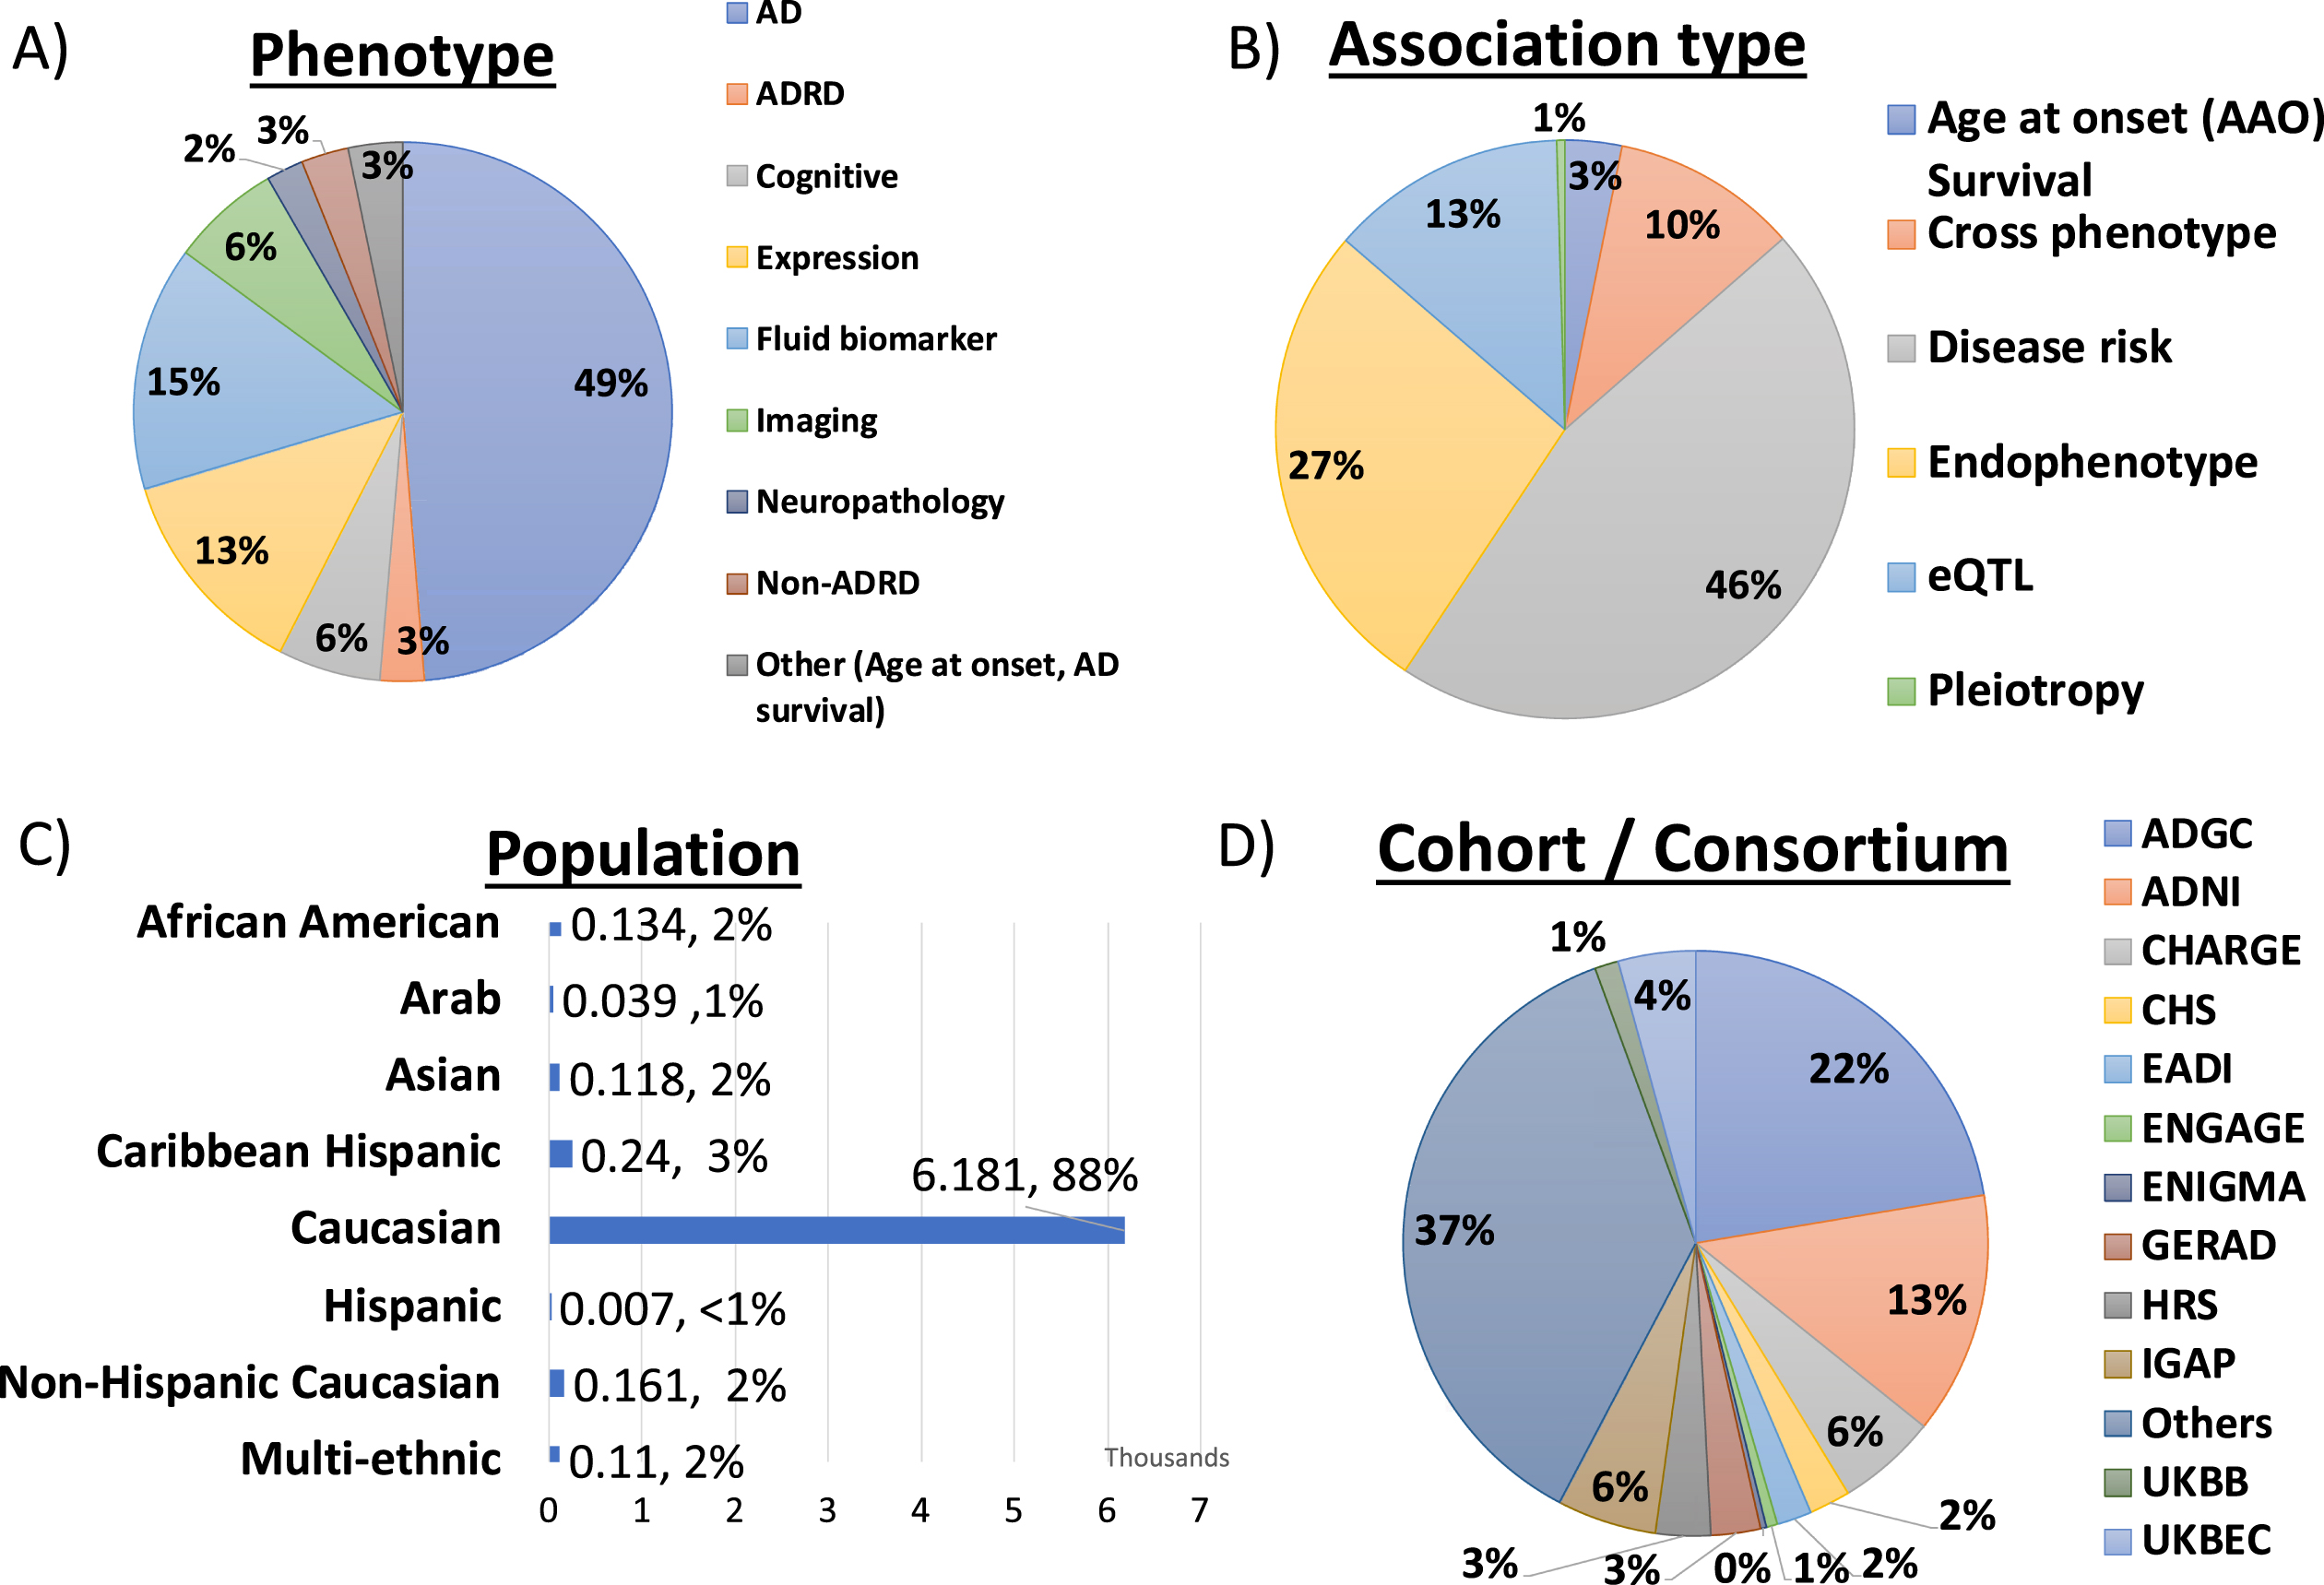 Summary of genetic association records in ADVP (N = 6990) by A) Phenotype, B) Association type, C) Population, and D) Cohort/Consortium.